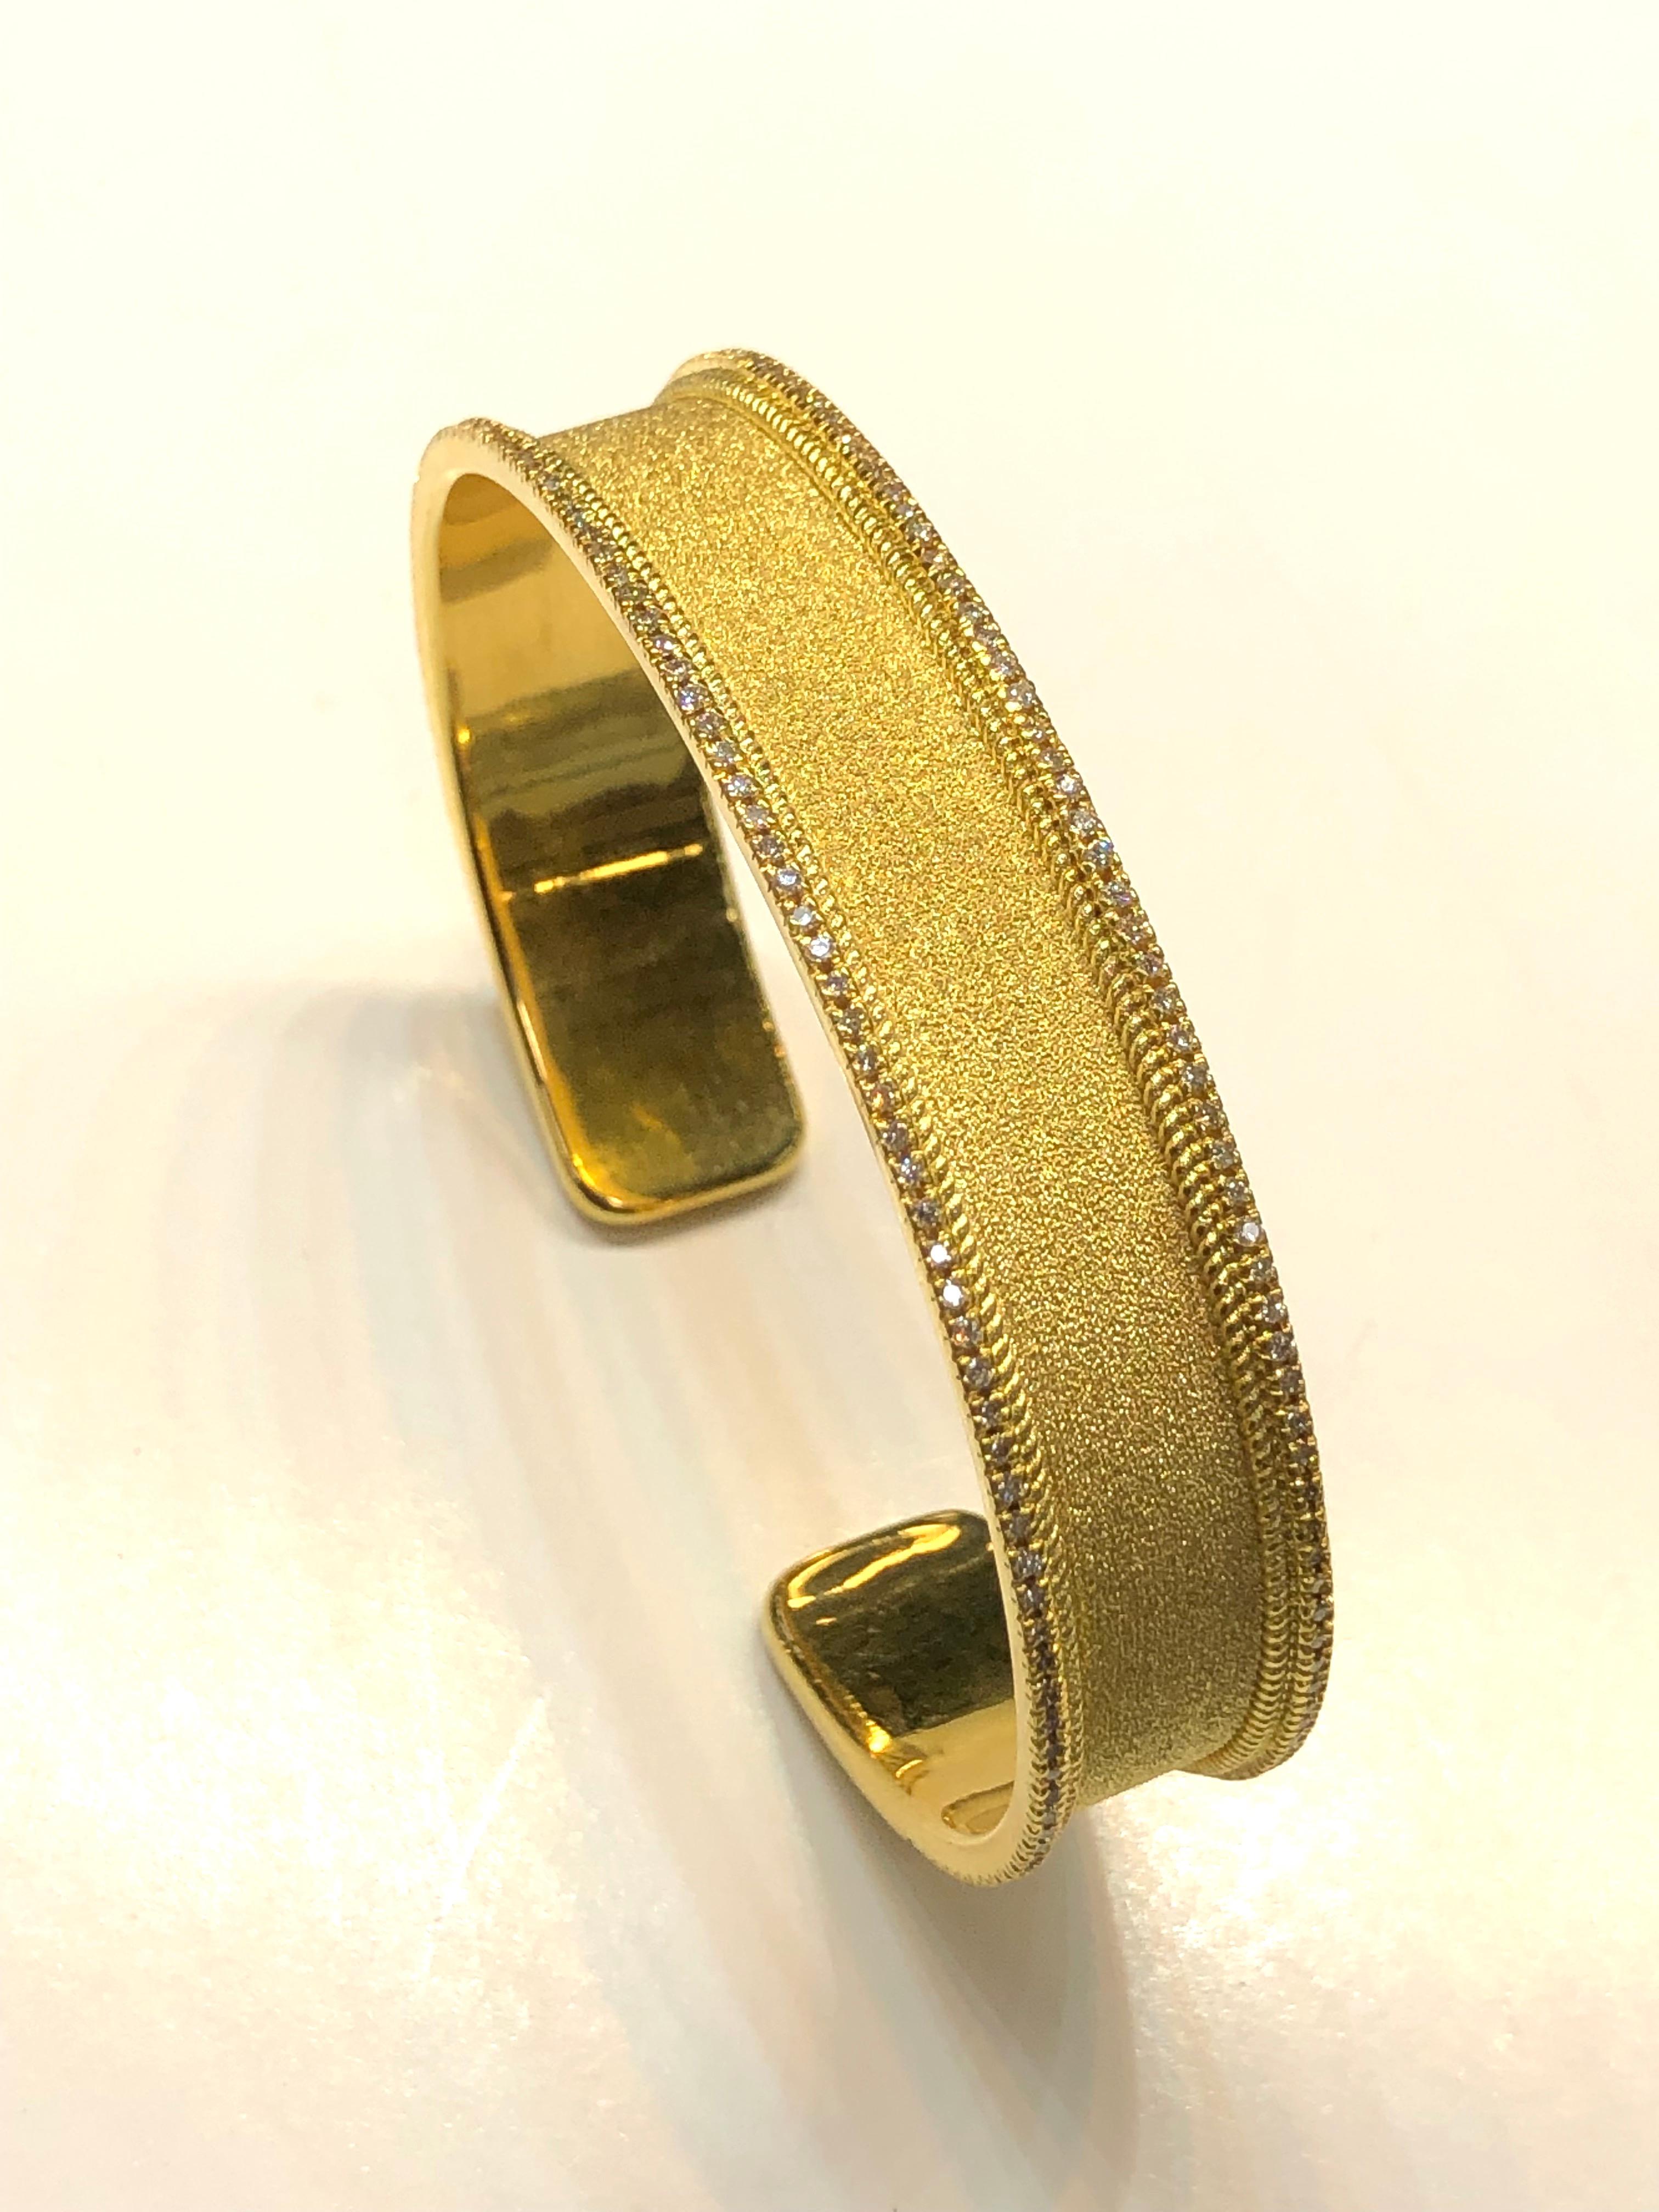 S.Georgios designer bangle bracelet hand made in 18 Karat yellow gold. This bracelet is finished in Byzantine style with the unique velvet look on the background. The bracelet features brilliant cut white diamonds total weight of 0.88 Carat around